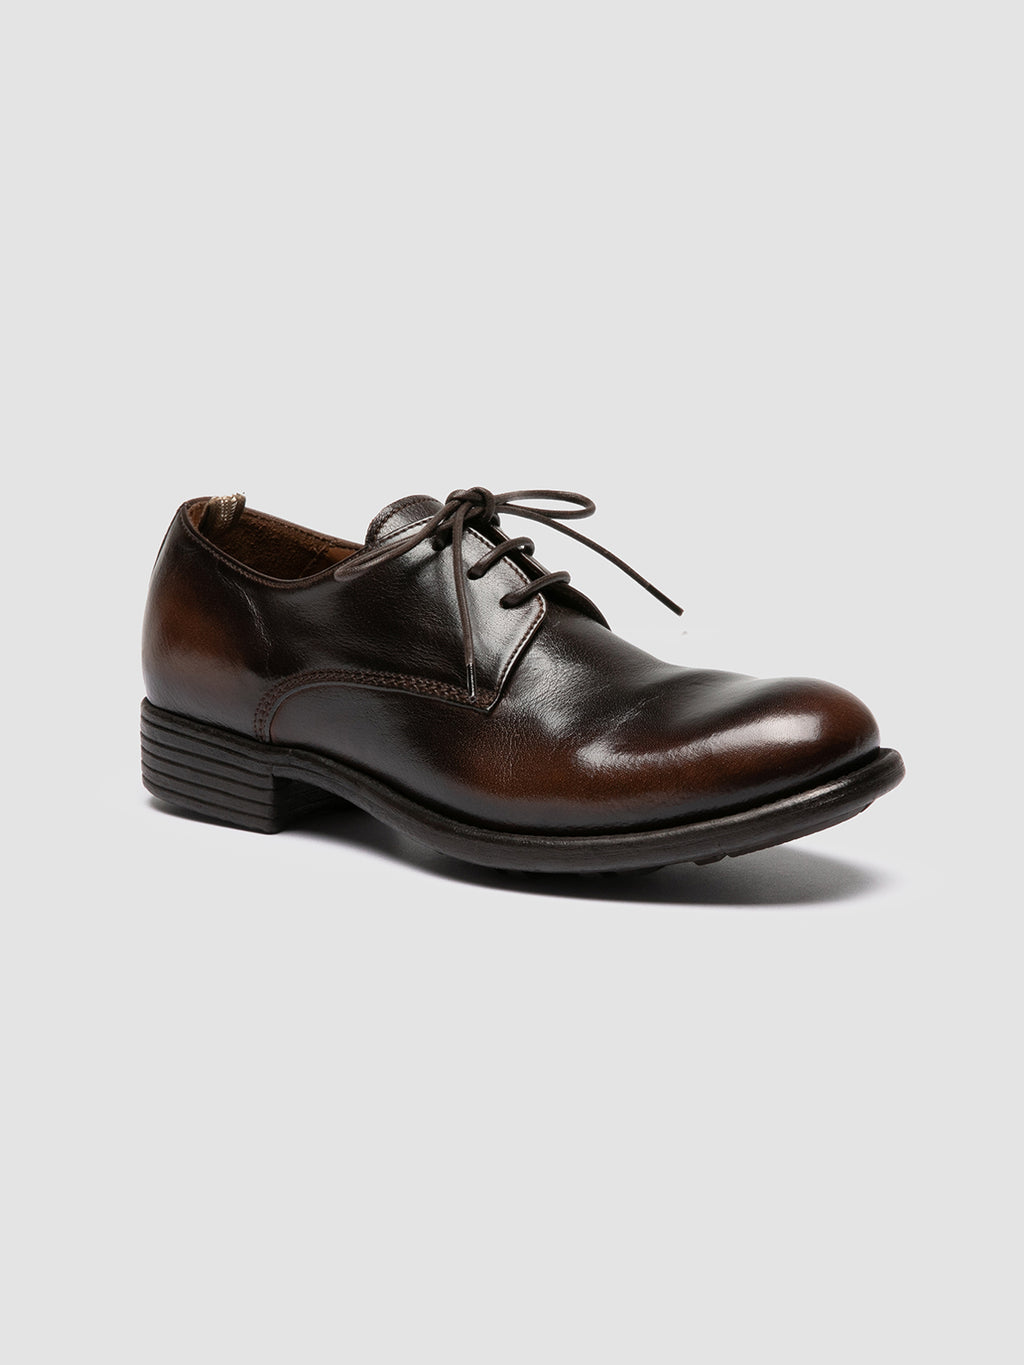 CALIXTE 068 - Brown Leather Derby Shoes